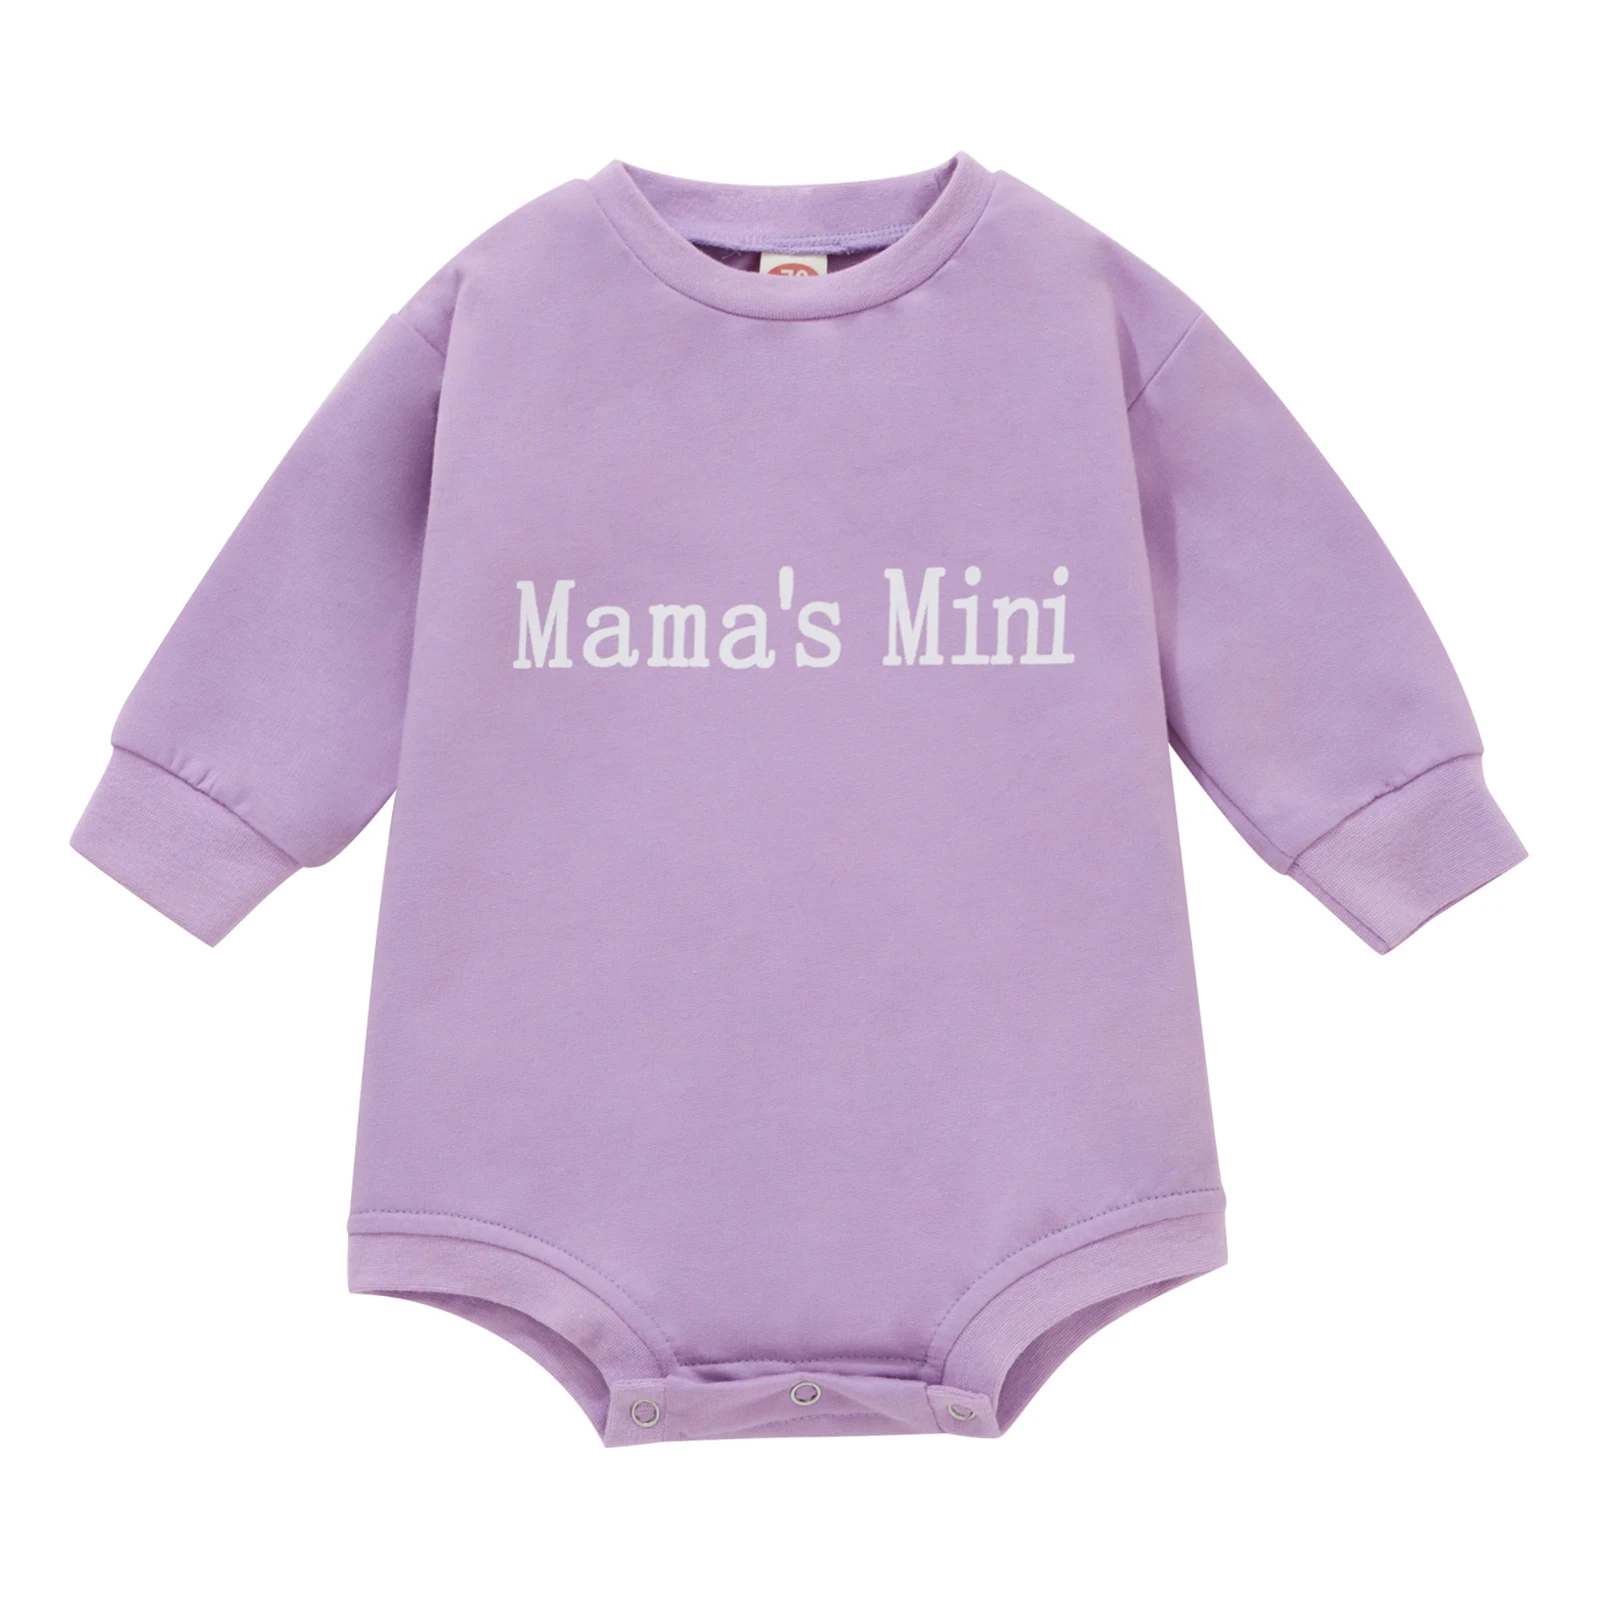 vintage Baby Bodysuits Cute Baby Girls Long Sleeve Romper Newborn Infant Clothes Mama Mini Letter Print Rompers 0-24 Months Baby Bodysuits for girl  Baby Rompers